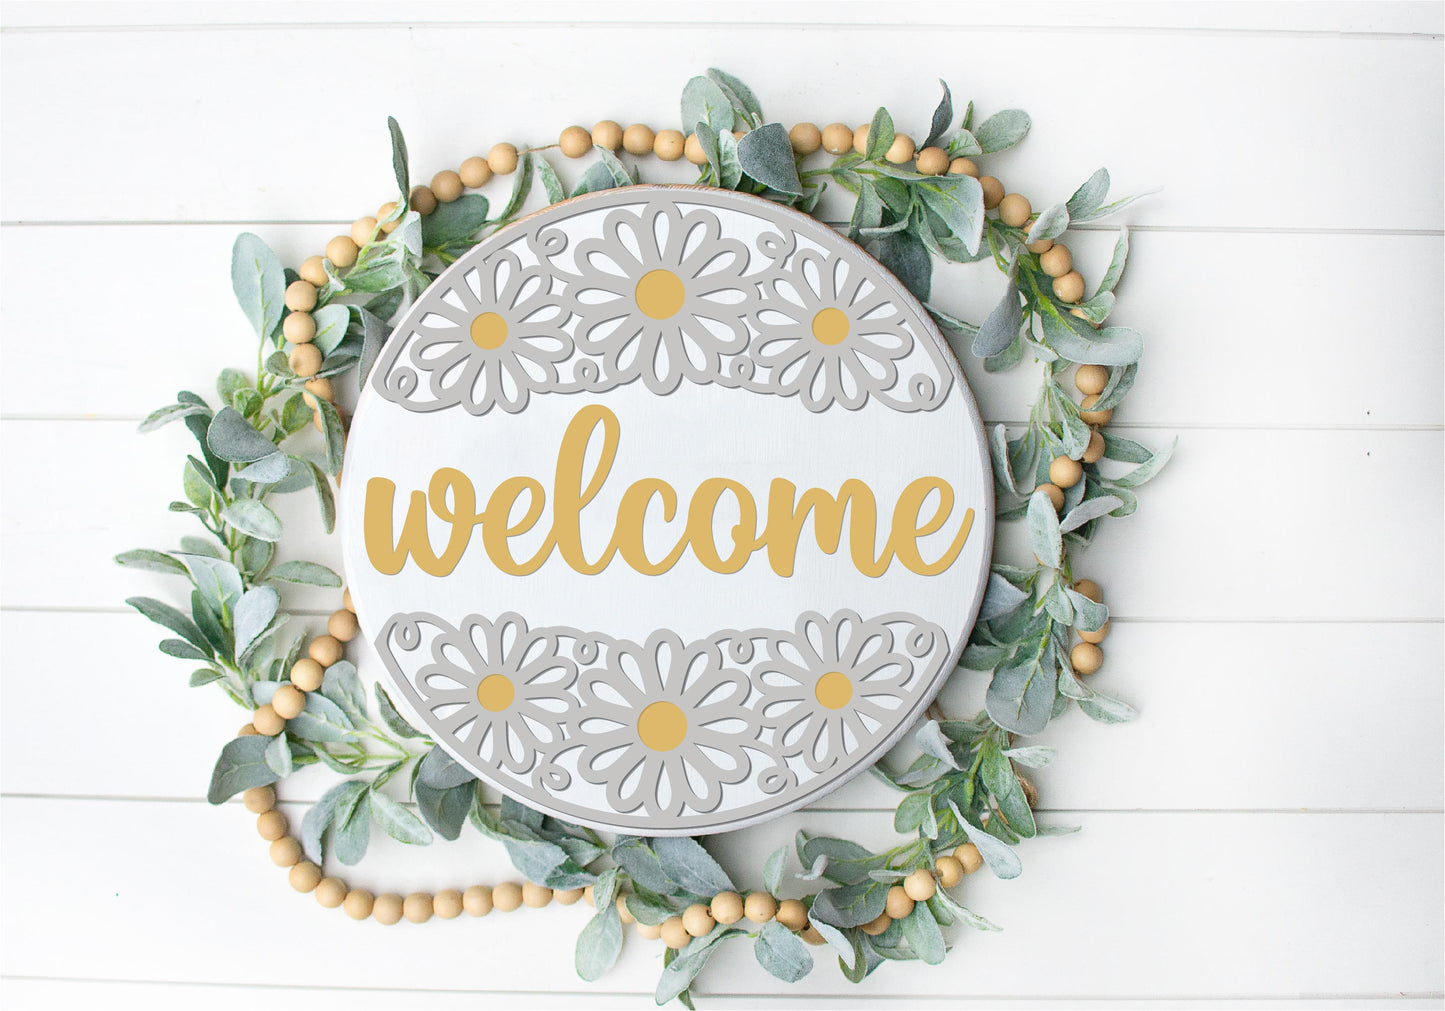 Daisy chain Welcome sign